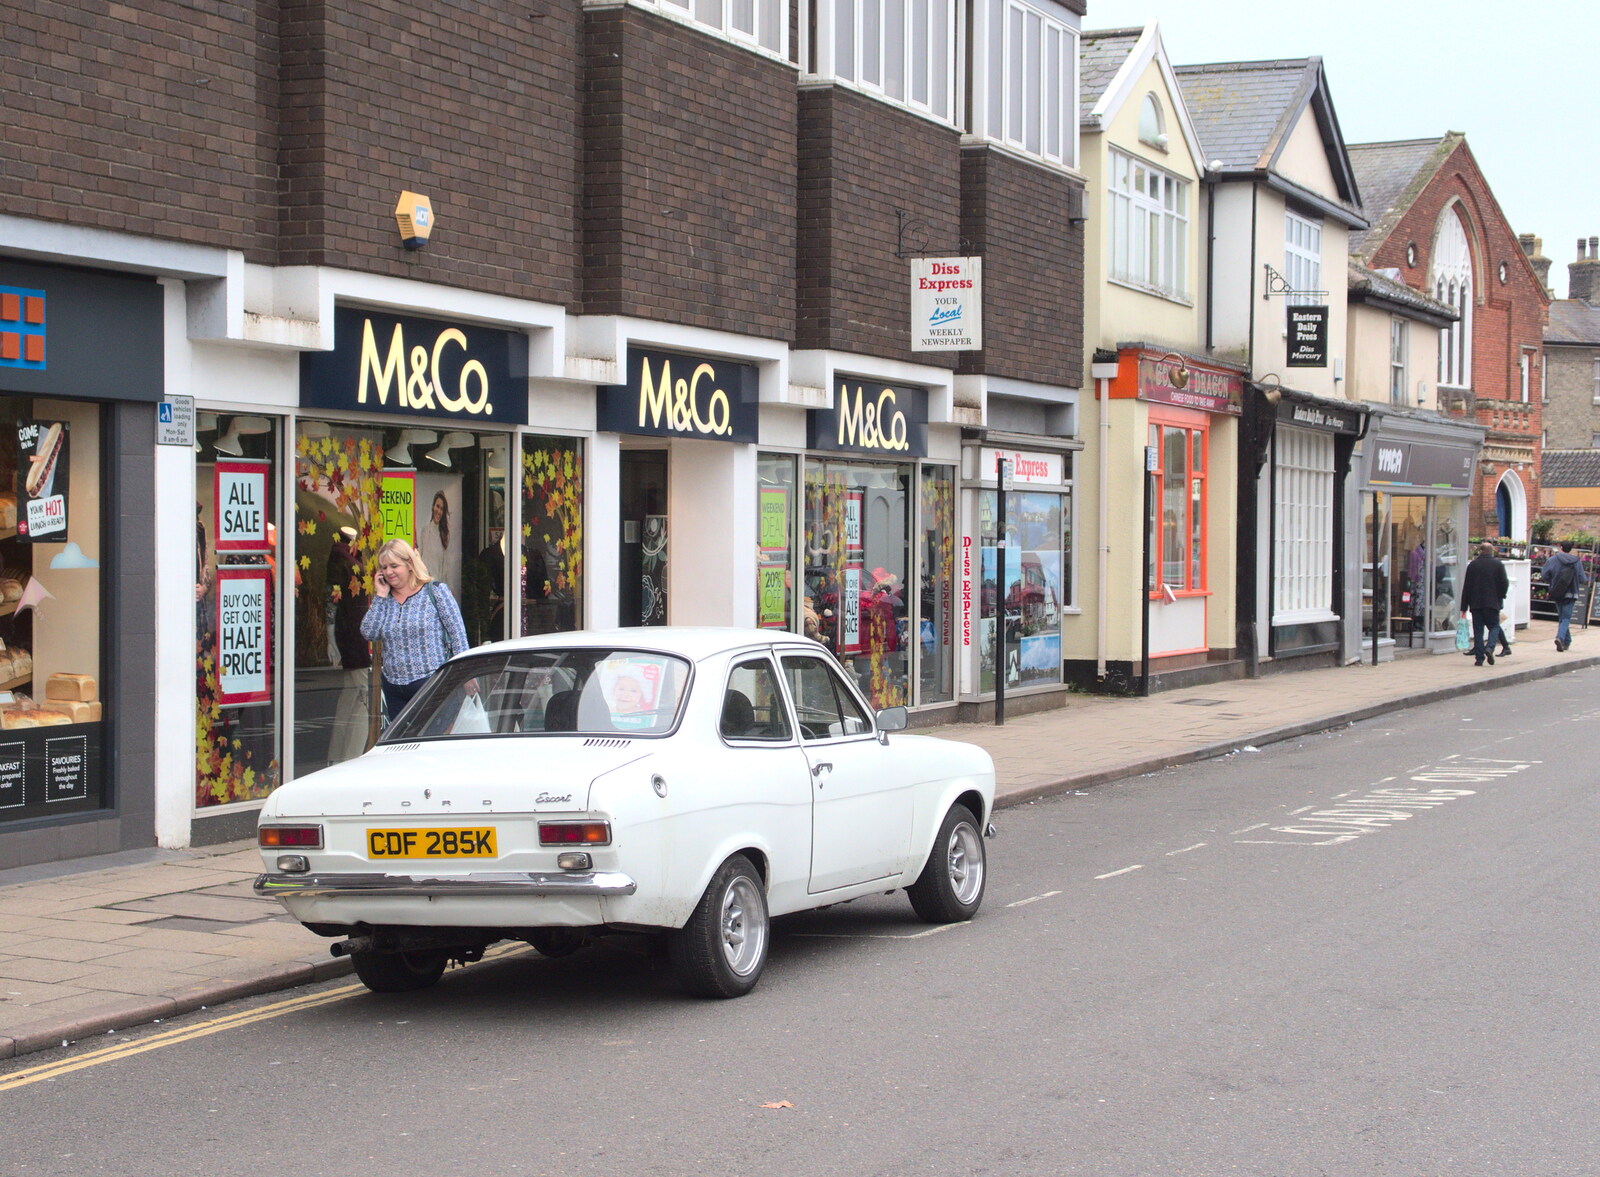 The Mark 1 Escort on Mere Street in Diss from Fred's Gyrobot, Brome, Suffolk - 18th October 2015